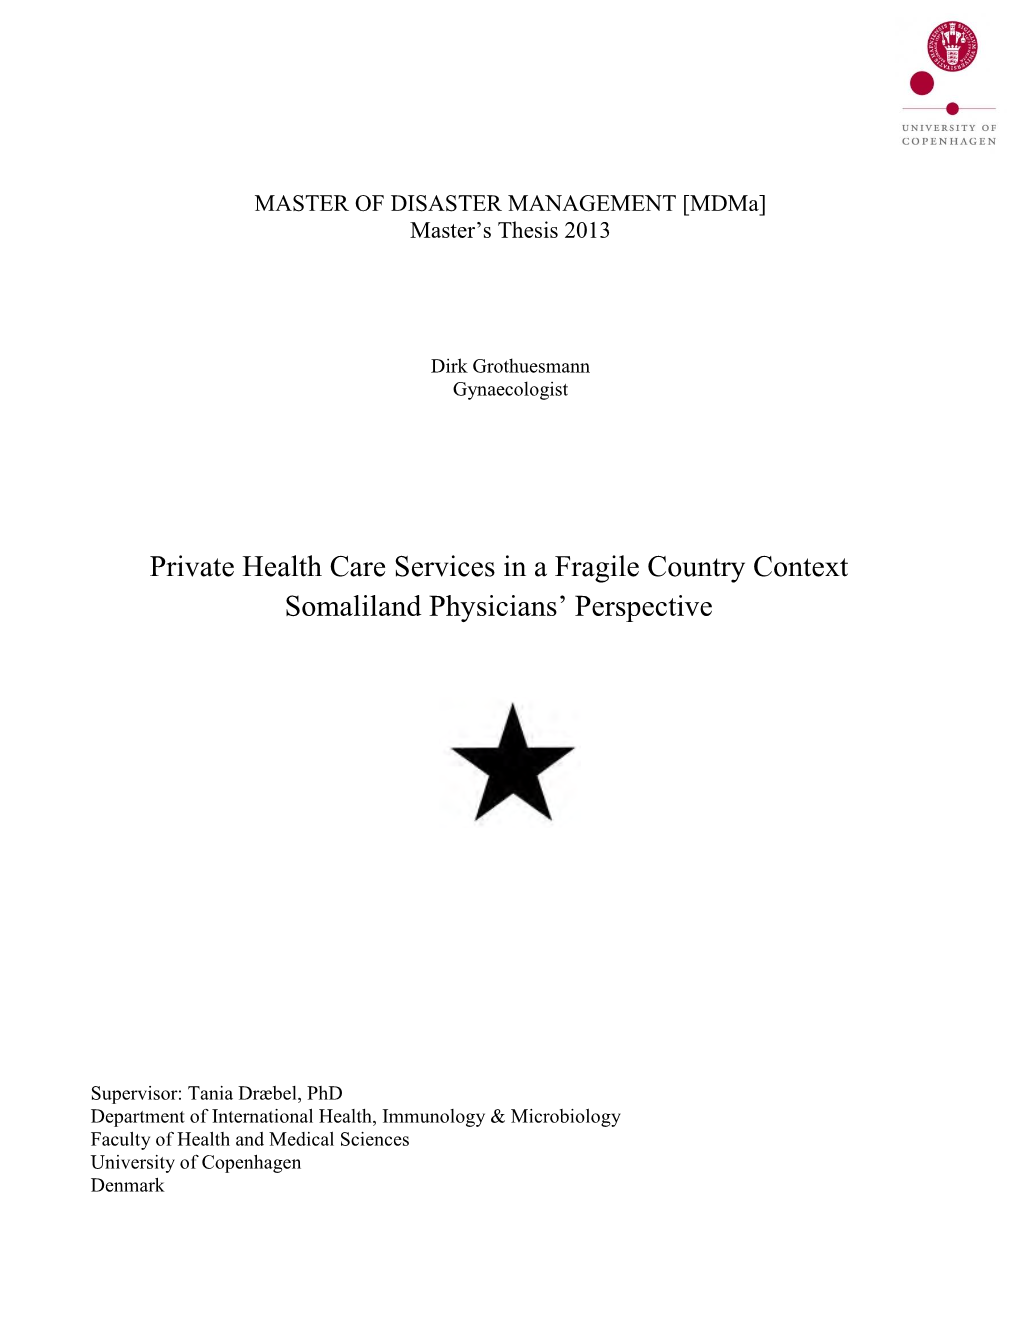 Private Health Care Services in a Fragile Country Context Somaliland Physicians’ Perspective